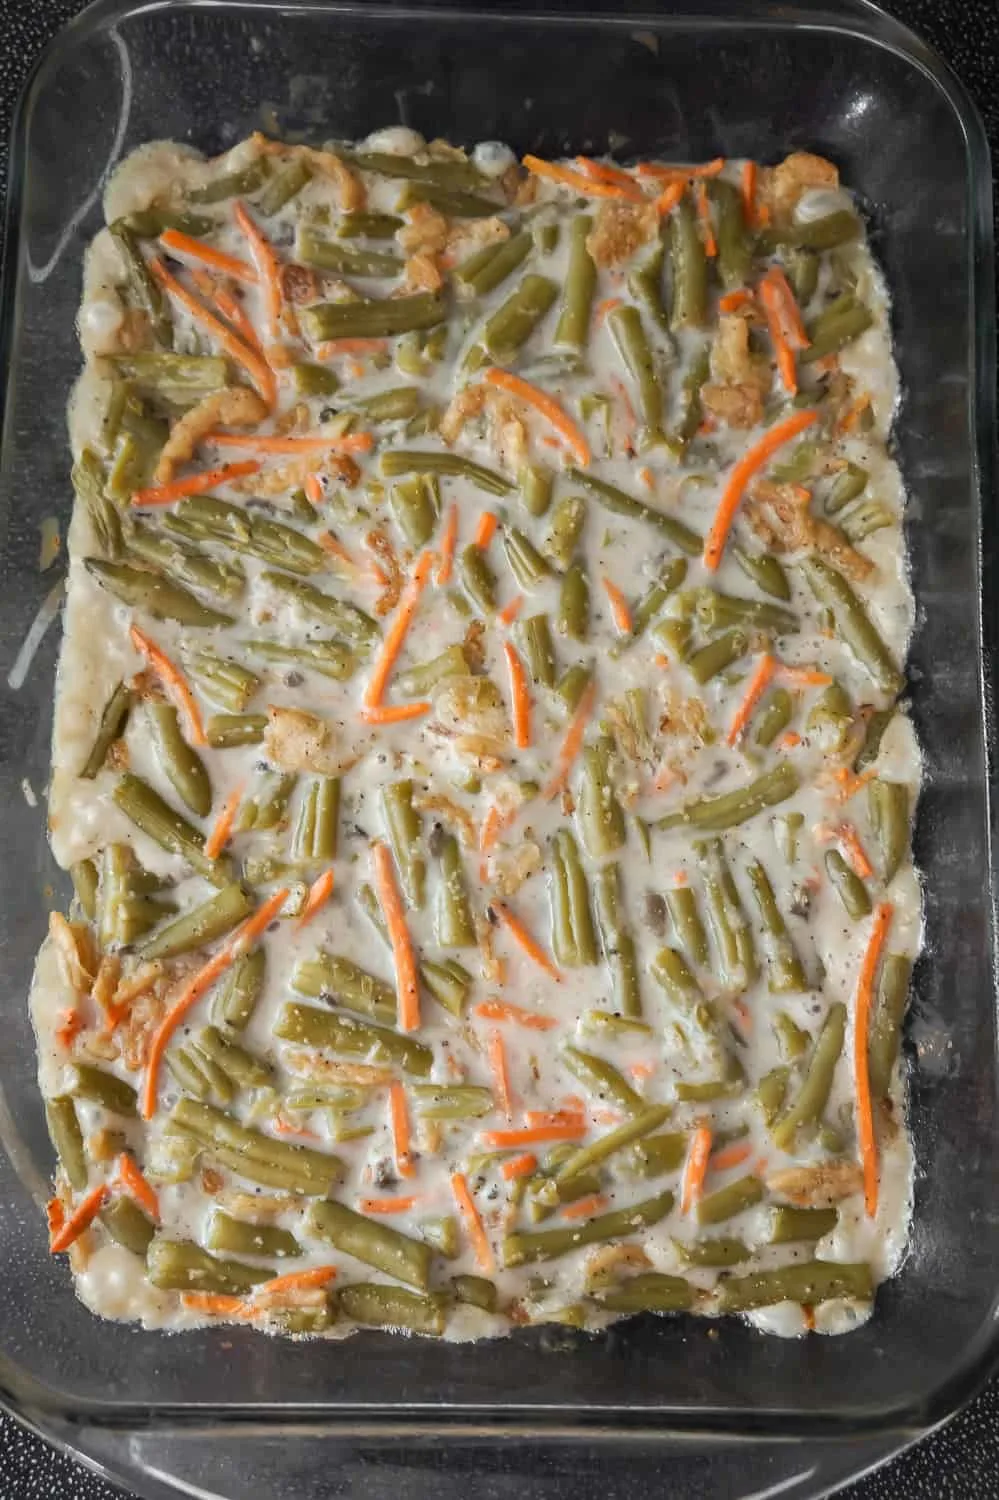 green beans, carrots and mushrooms soup mixture in a 9 x 13 inch baking dish